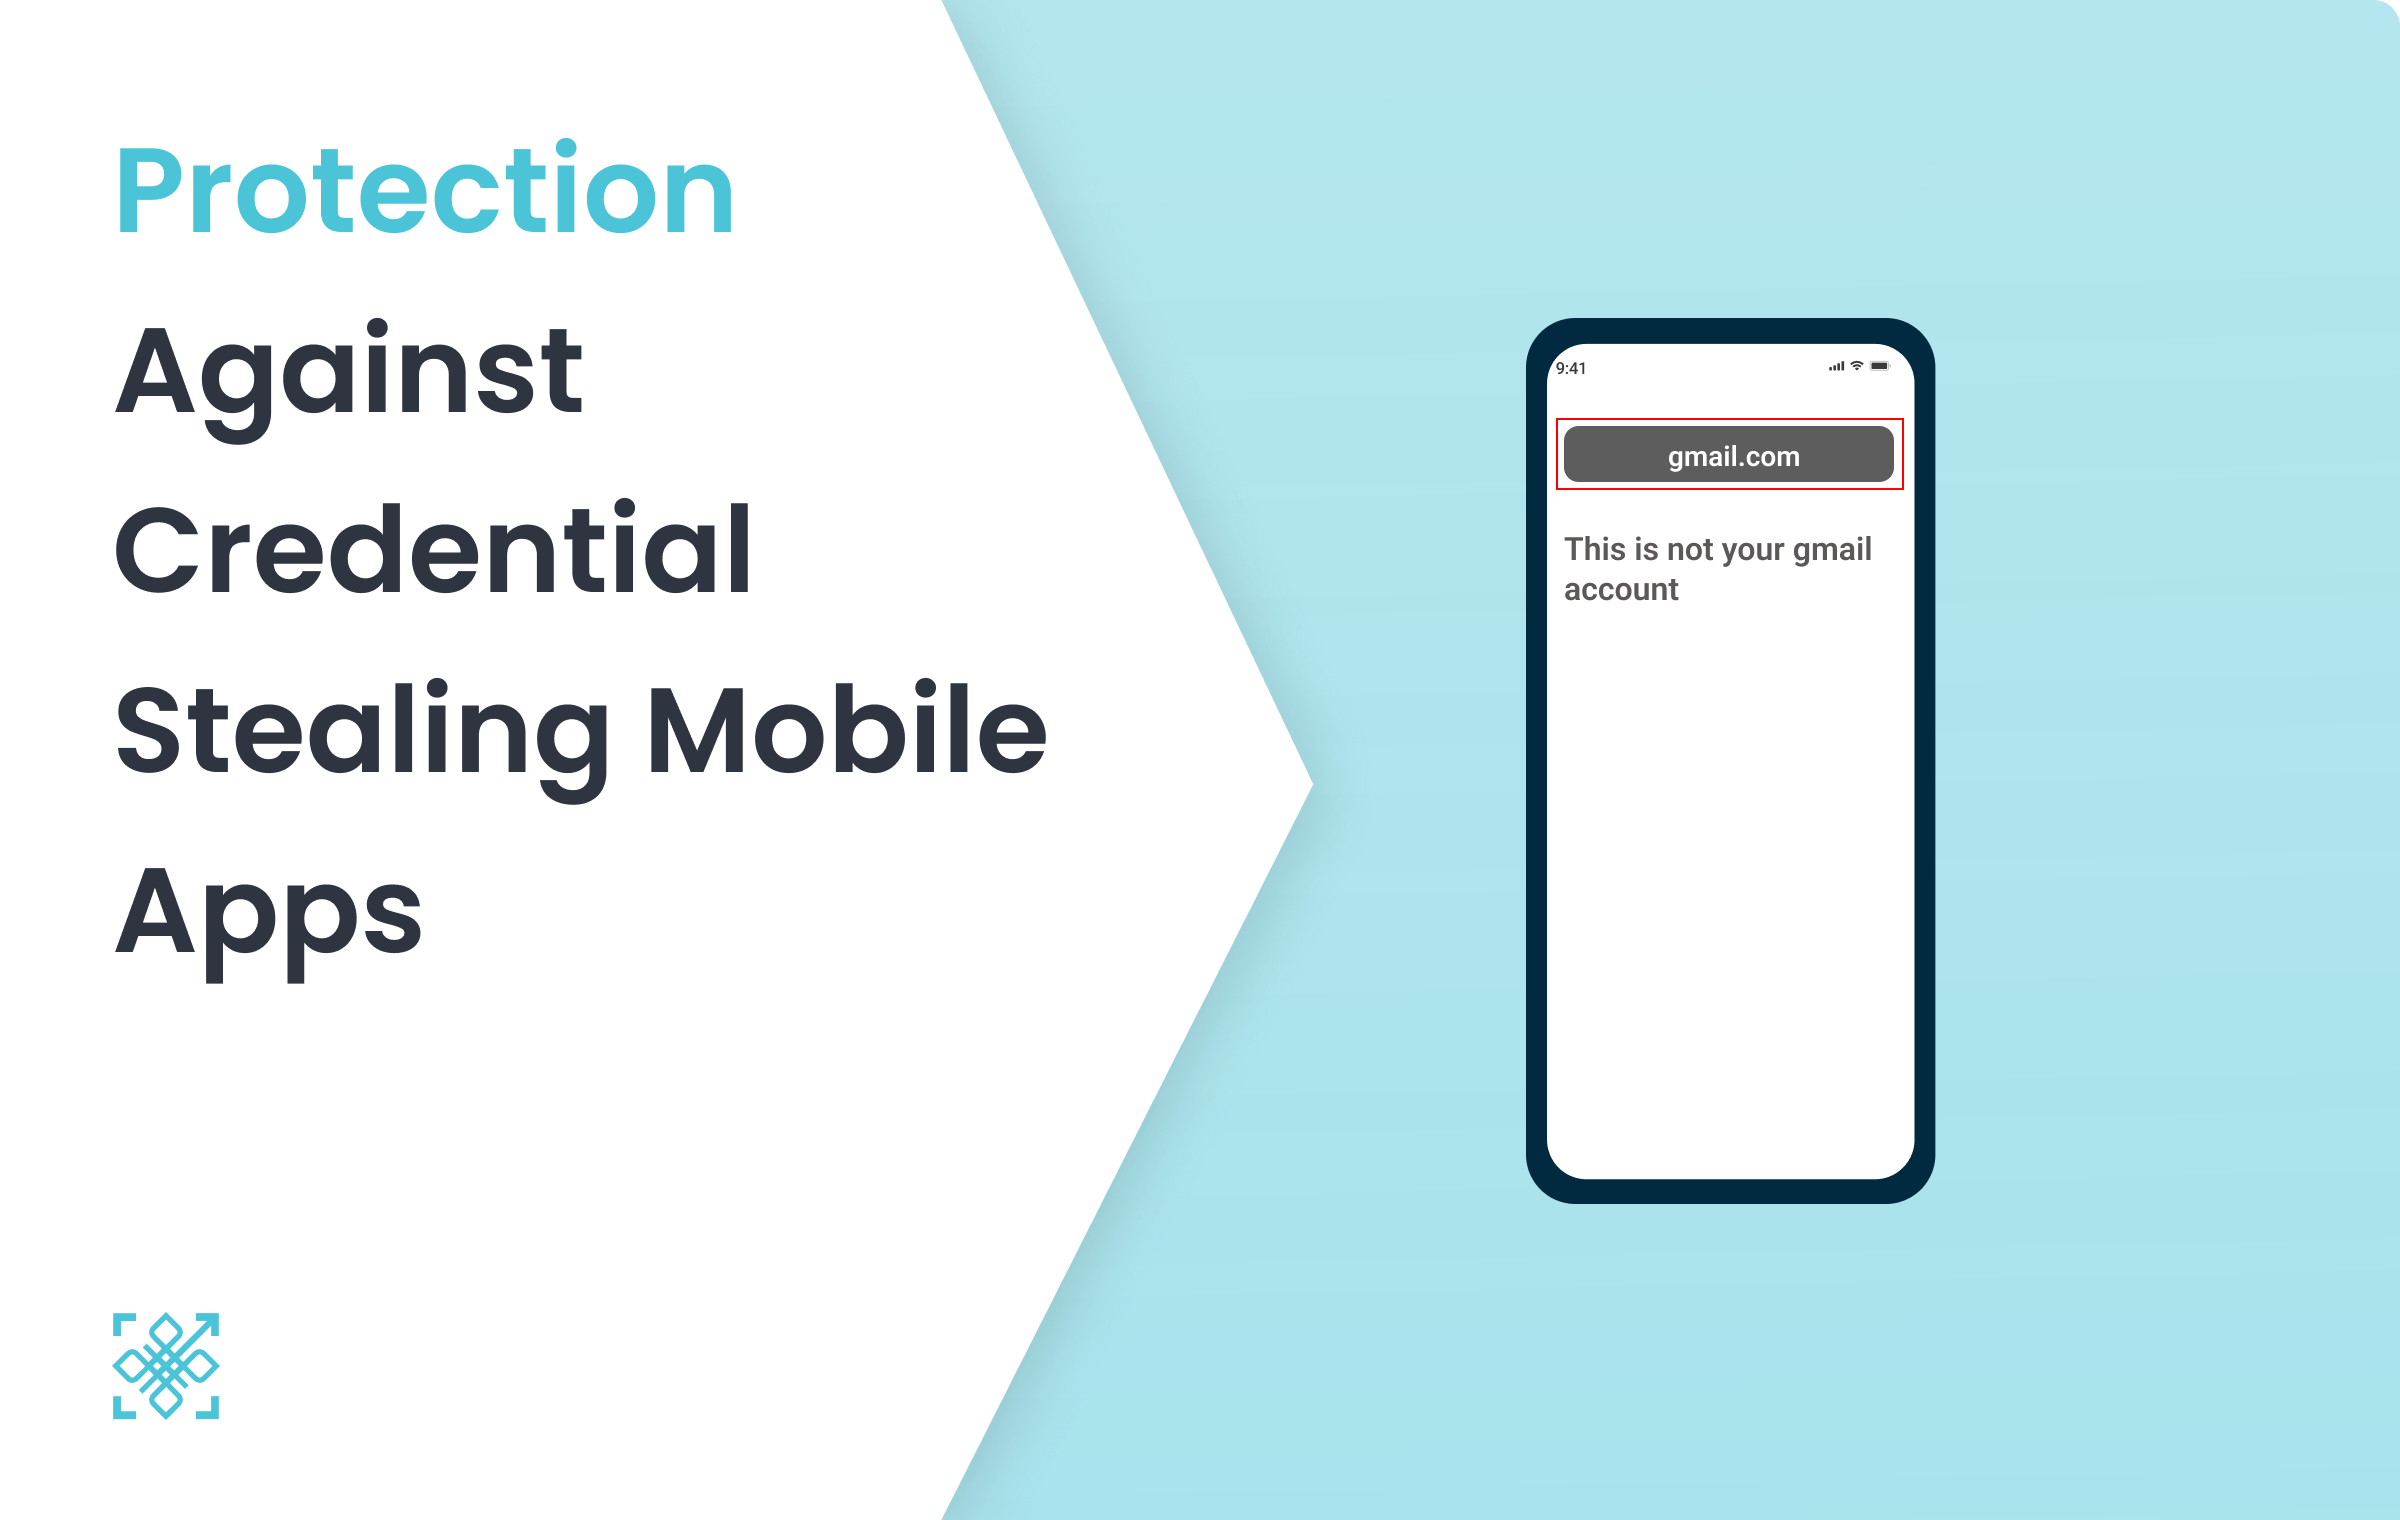 Protection Against Credential Stealing Mobile Apps